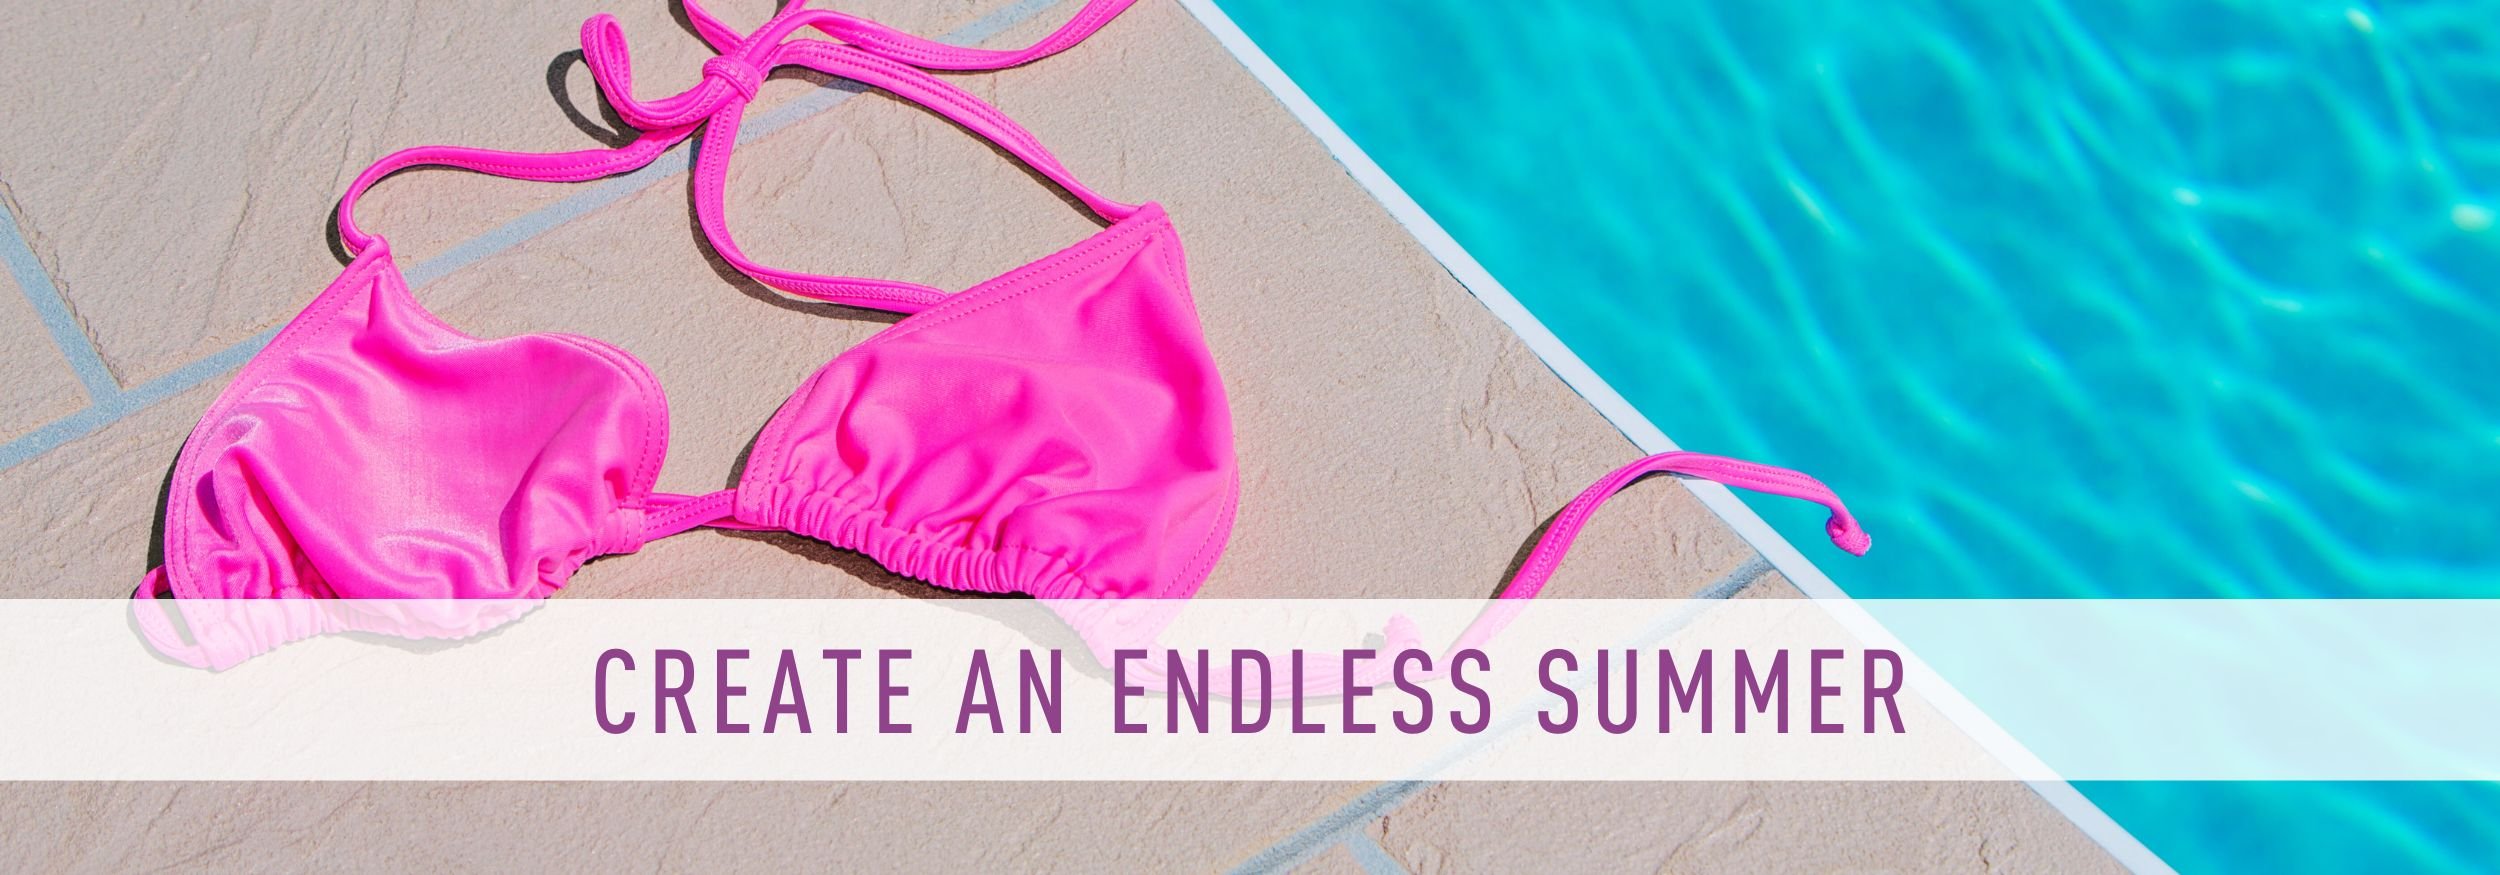 Ways to Make That Summer Feeling Last All Year Long — NAUGHTY EVENTS